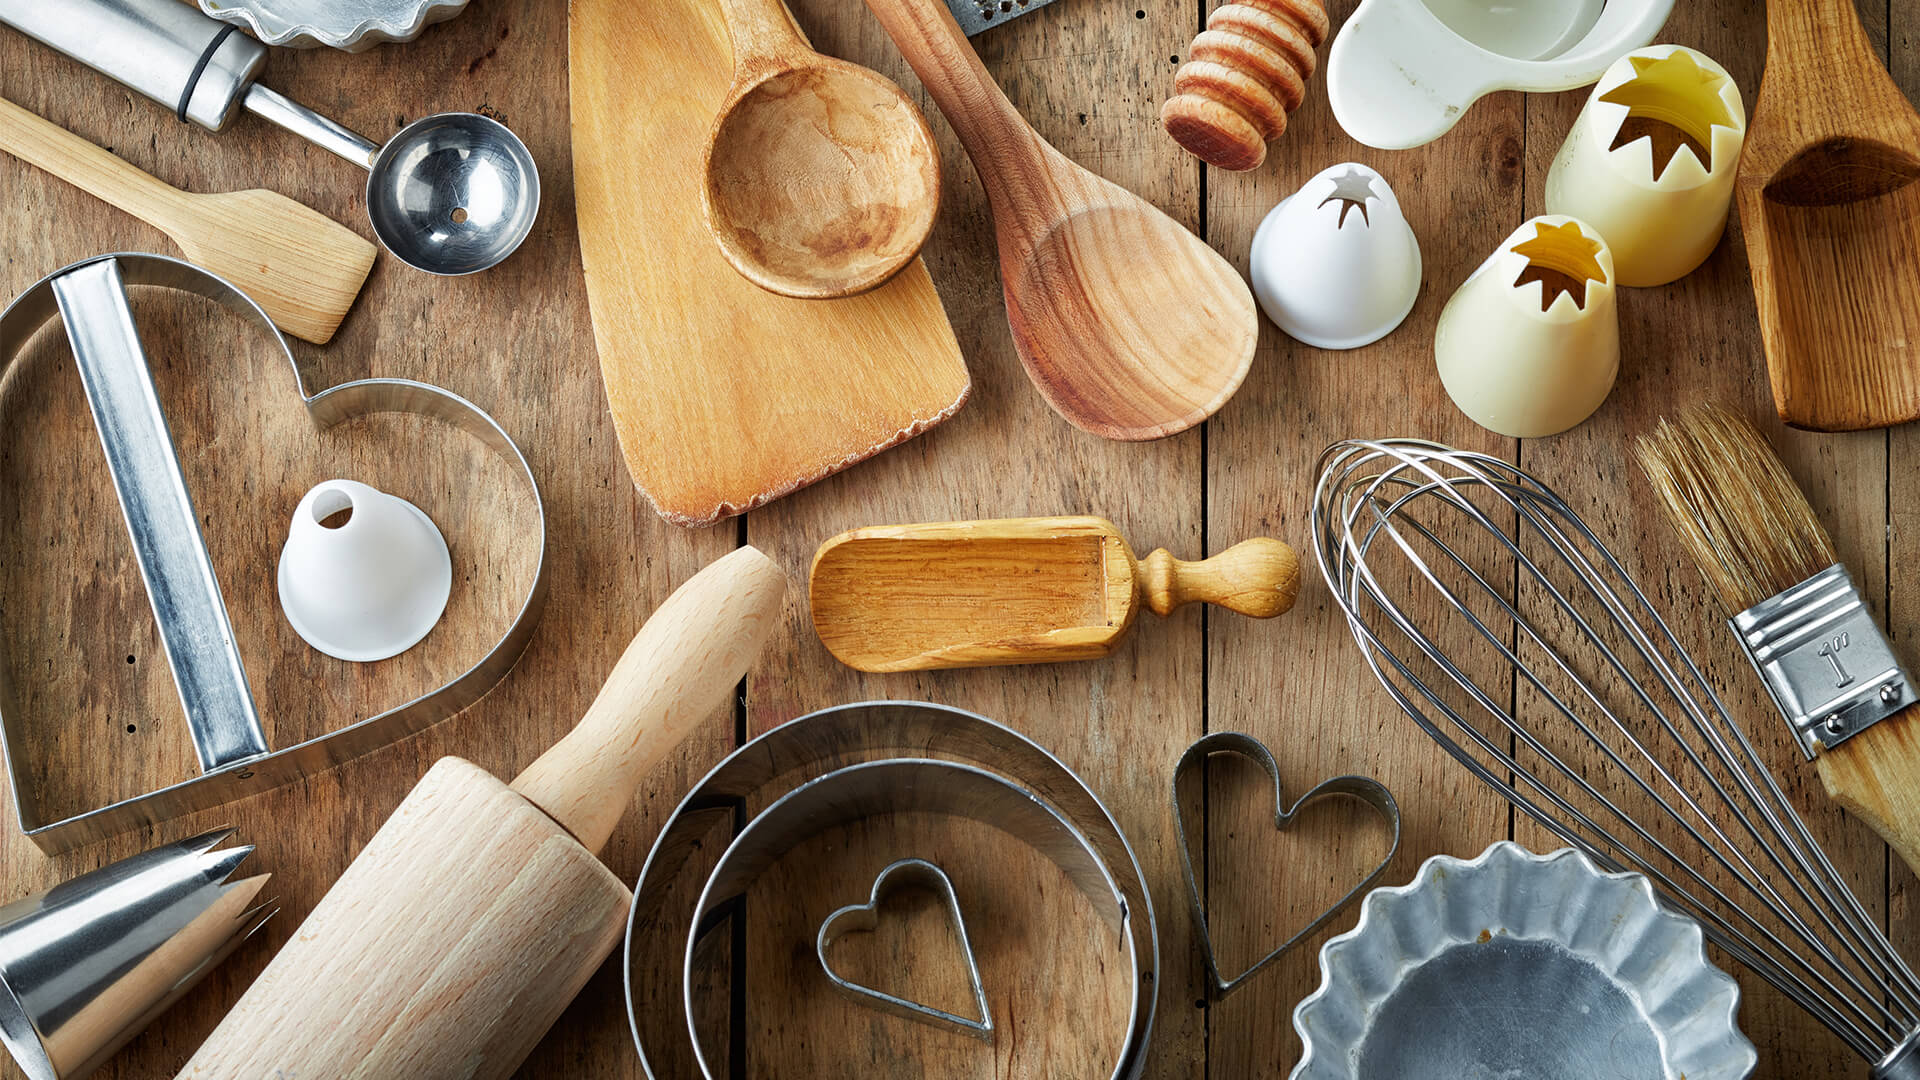 Basic Kitchen Essentials That'll Help You Prepare Delicious Meals